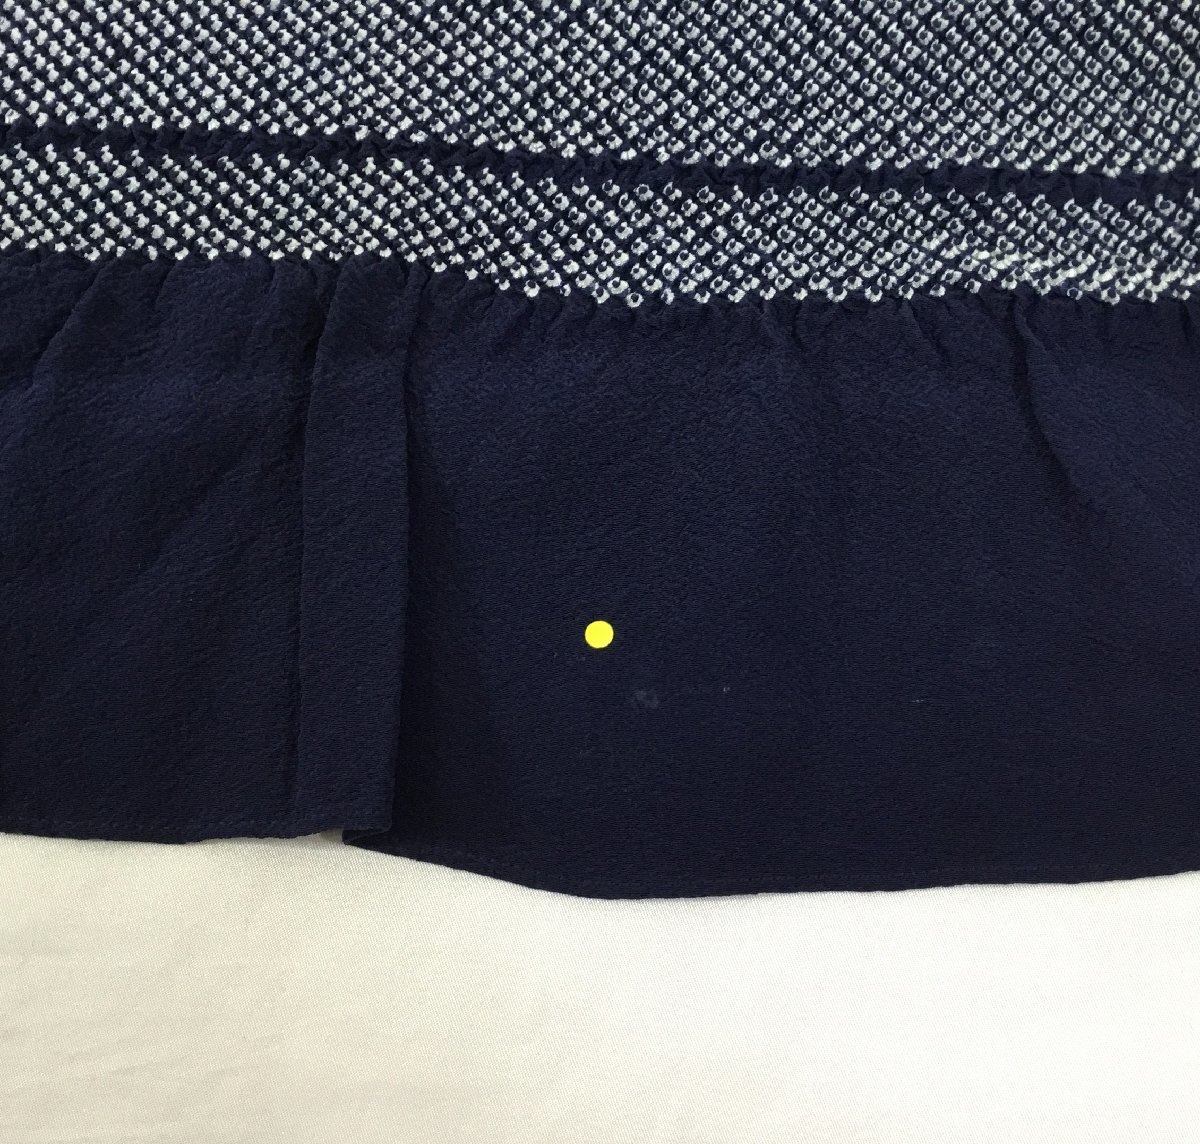  waist band / men's / capital aperture stop / silk / navy blue / Kyoto . industry . collection / boxed [ yuzu . is ]3939